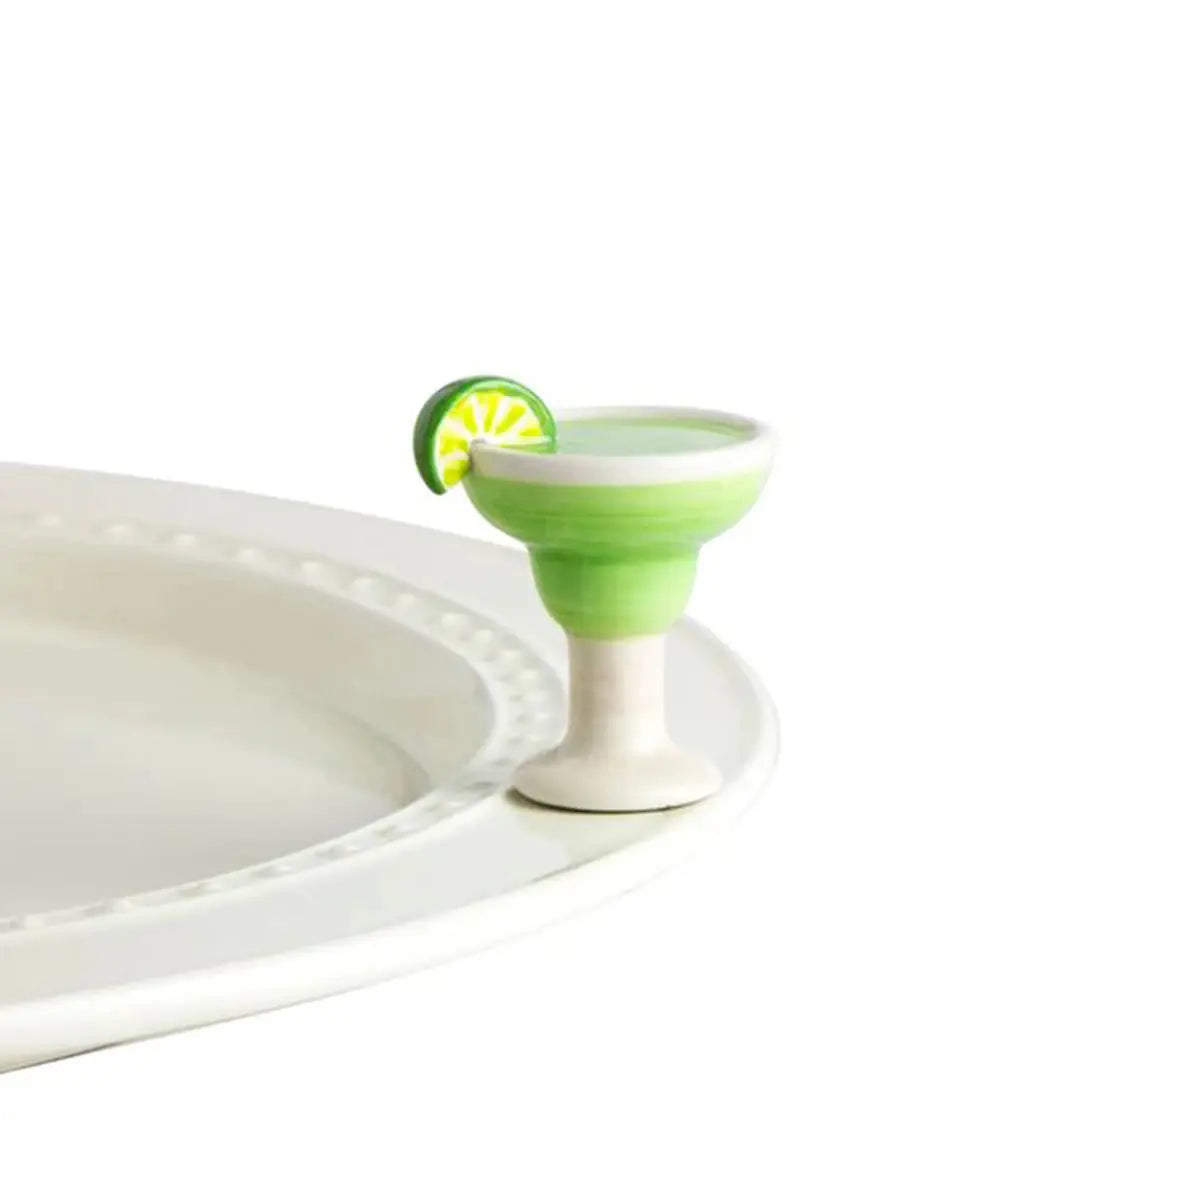 Nora Fleming Lime and Salt Please Margarita Mini on a serving plate